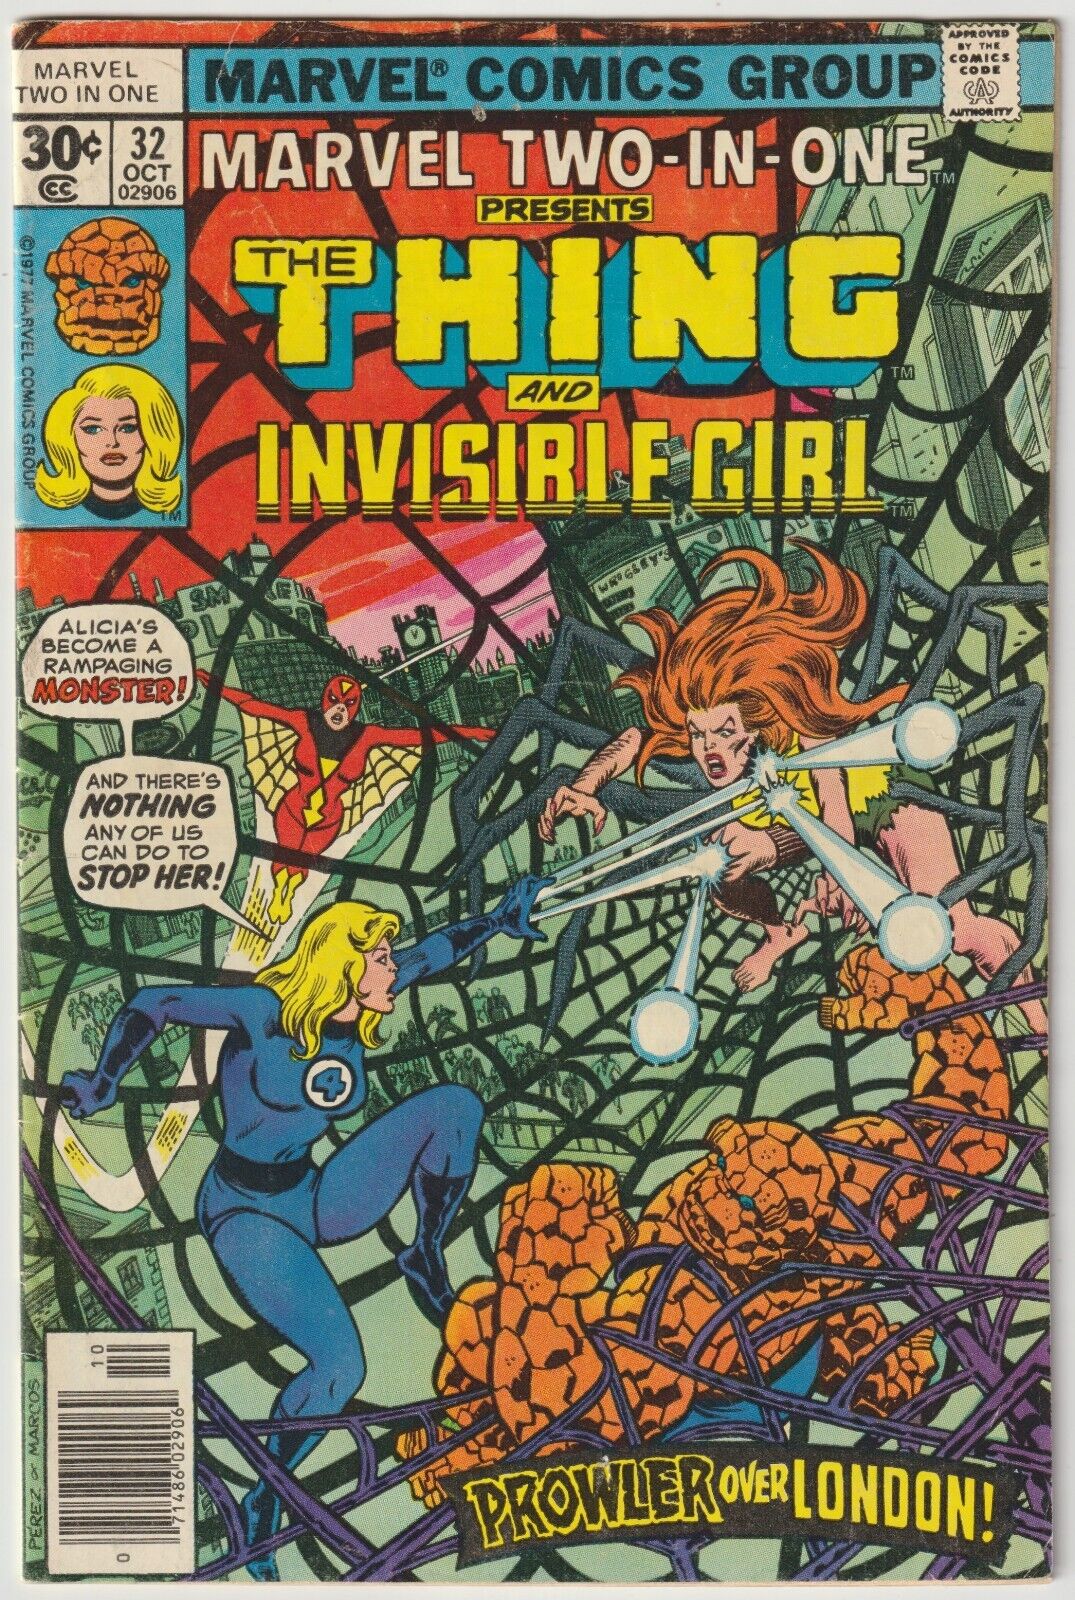 Marvel Two In One #32 The Thing & Invisible Girl October 1977 Spider Woman